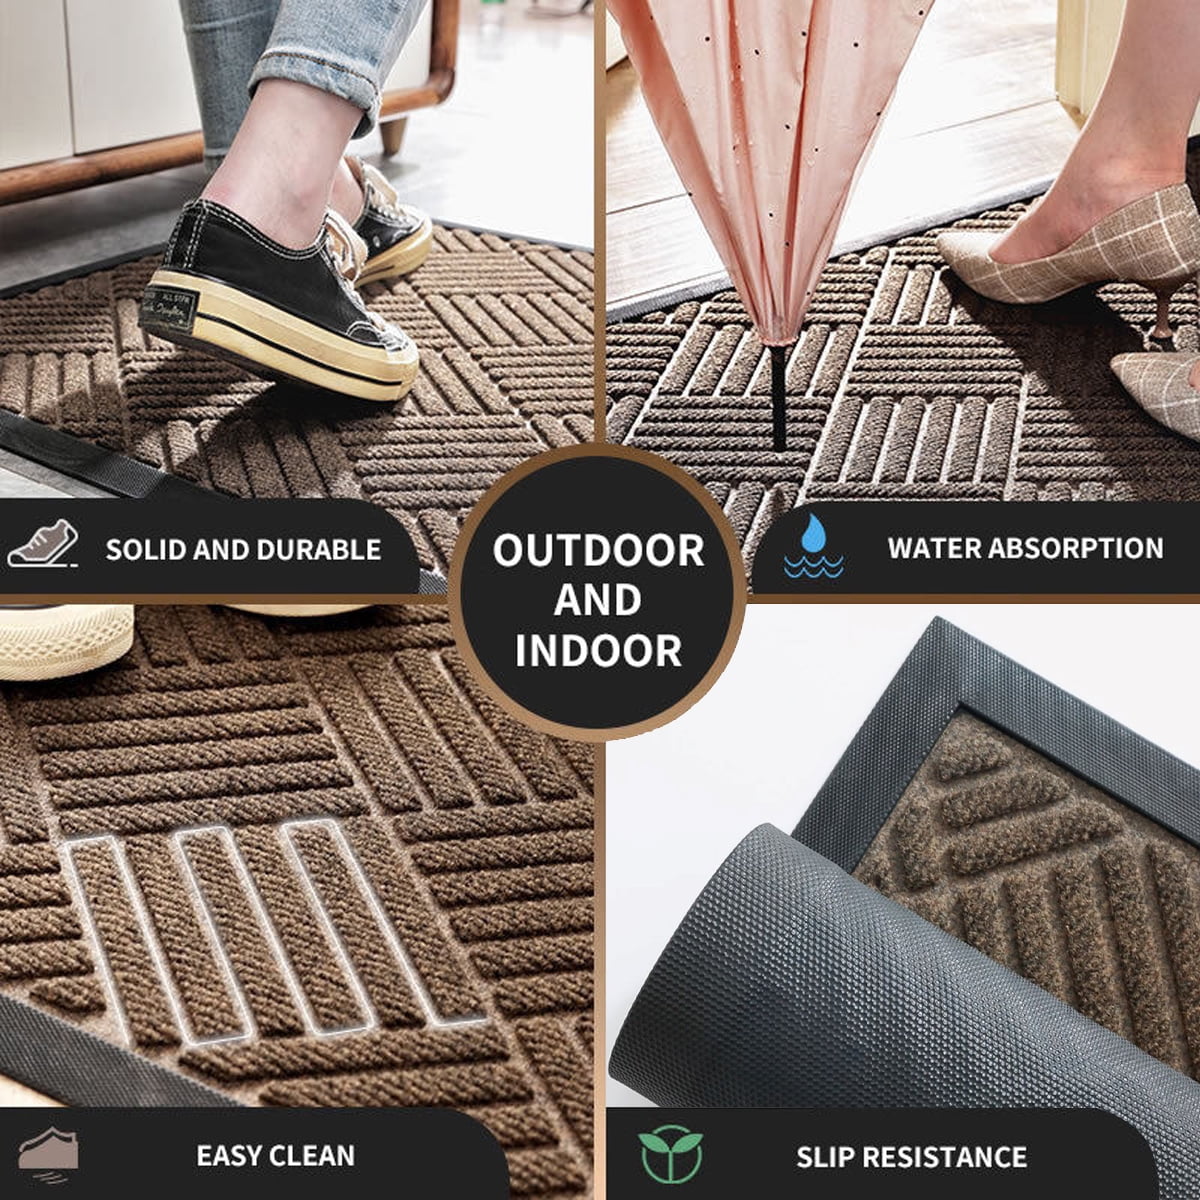  BAGAIL Front Door Mat, Heavy Duty Durable Doormat, All-Weather  Entryway Mats with Non-Slip Natural Rubber Backing, Indoor Outdoor, Dirt  and Fade Resistant, Easy Clean - 35x23.5, Grey Maze : Patio, Lawn